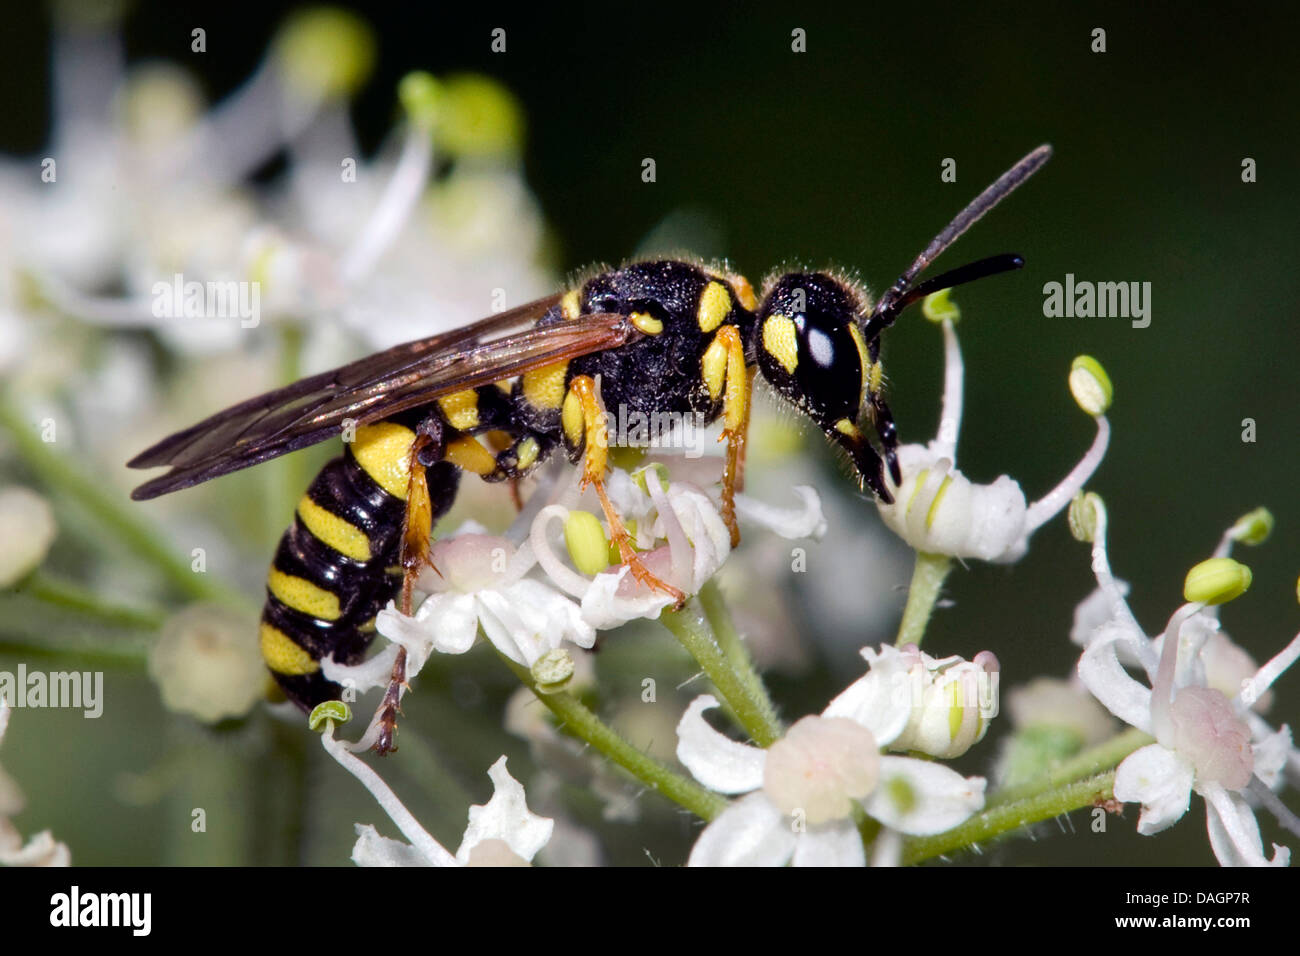 sand-tailed digger wasp (Cerceris arenaria), on white flowers, Germany Stock Photo